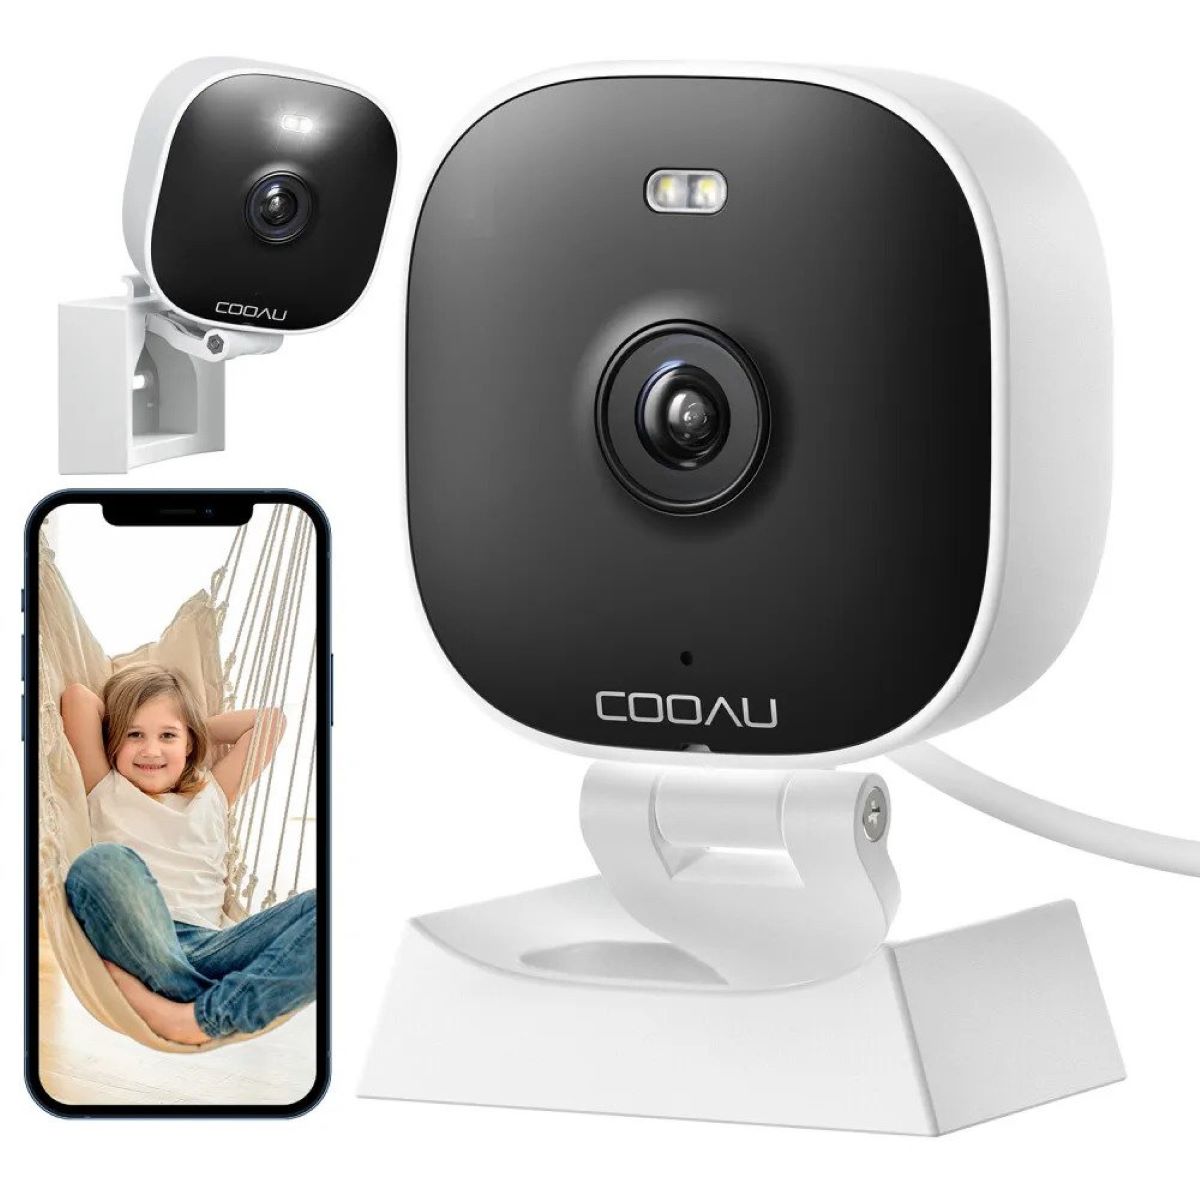 How To Activate Cooau Home Security Wireless IP Camera 1080P Wi-Fi CCTV Surveillance Webcam